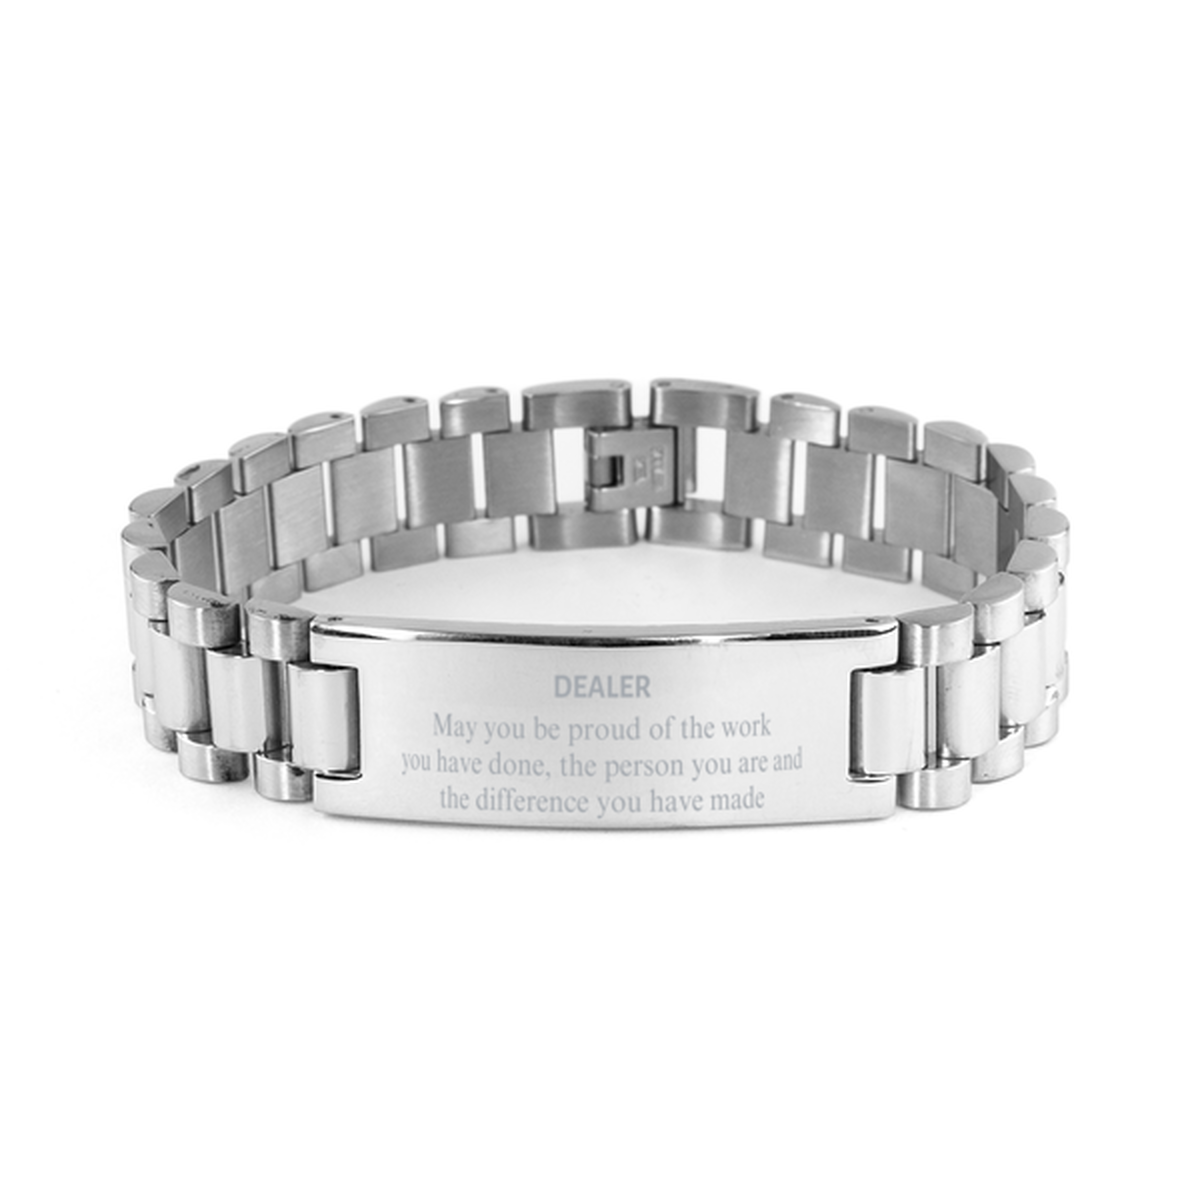 Dealer May you be proud of the work you have done, Retirement Dealer Ladder Stainless Steel Bracelet for Colleague Appreciation Gifts Amazing for Dealer